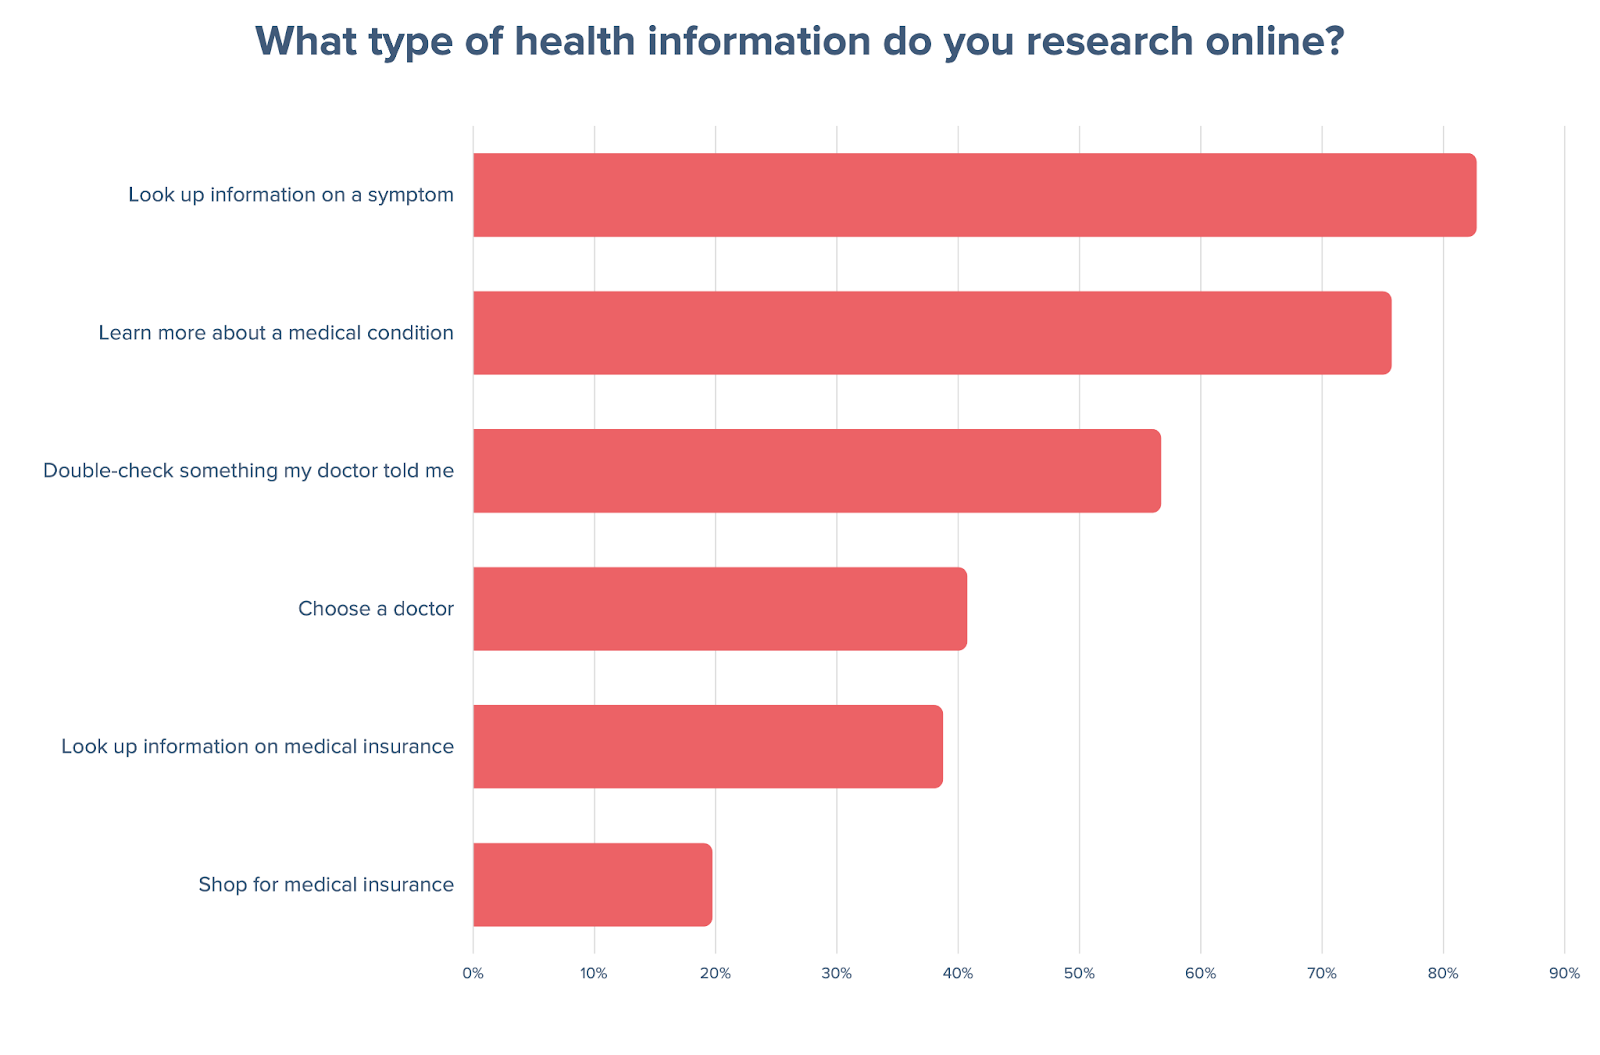 A chart shows that the information most commonly looked up online is, in order: Looking up info on symptoms, learning more about a medical condition, double-checking something a doctor told them, and choosing a doctor. Least common is to shop for medical insurance.